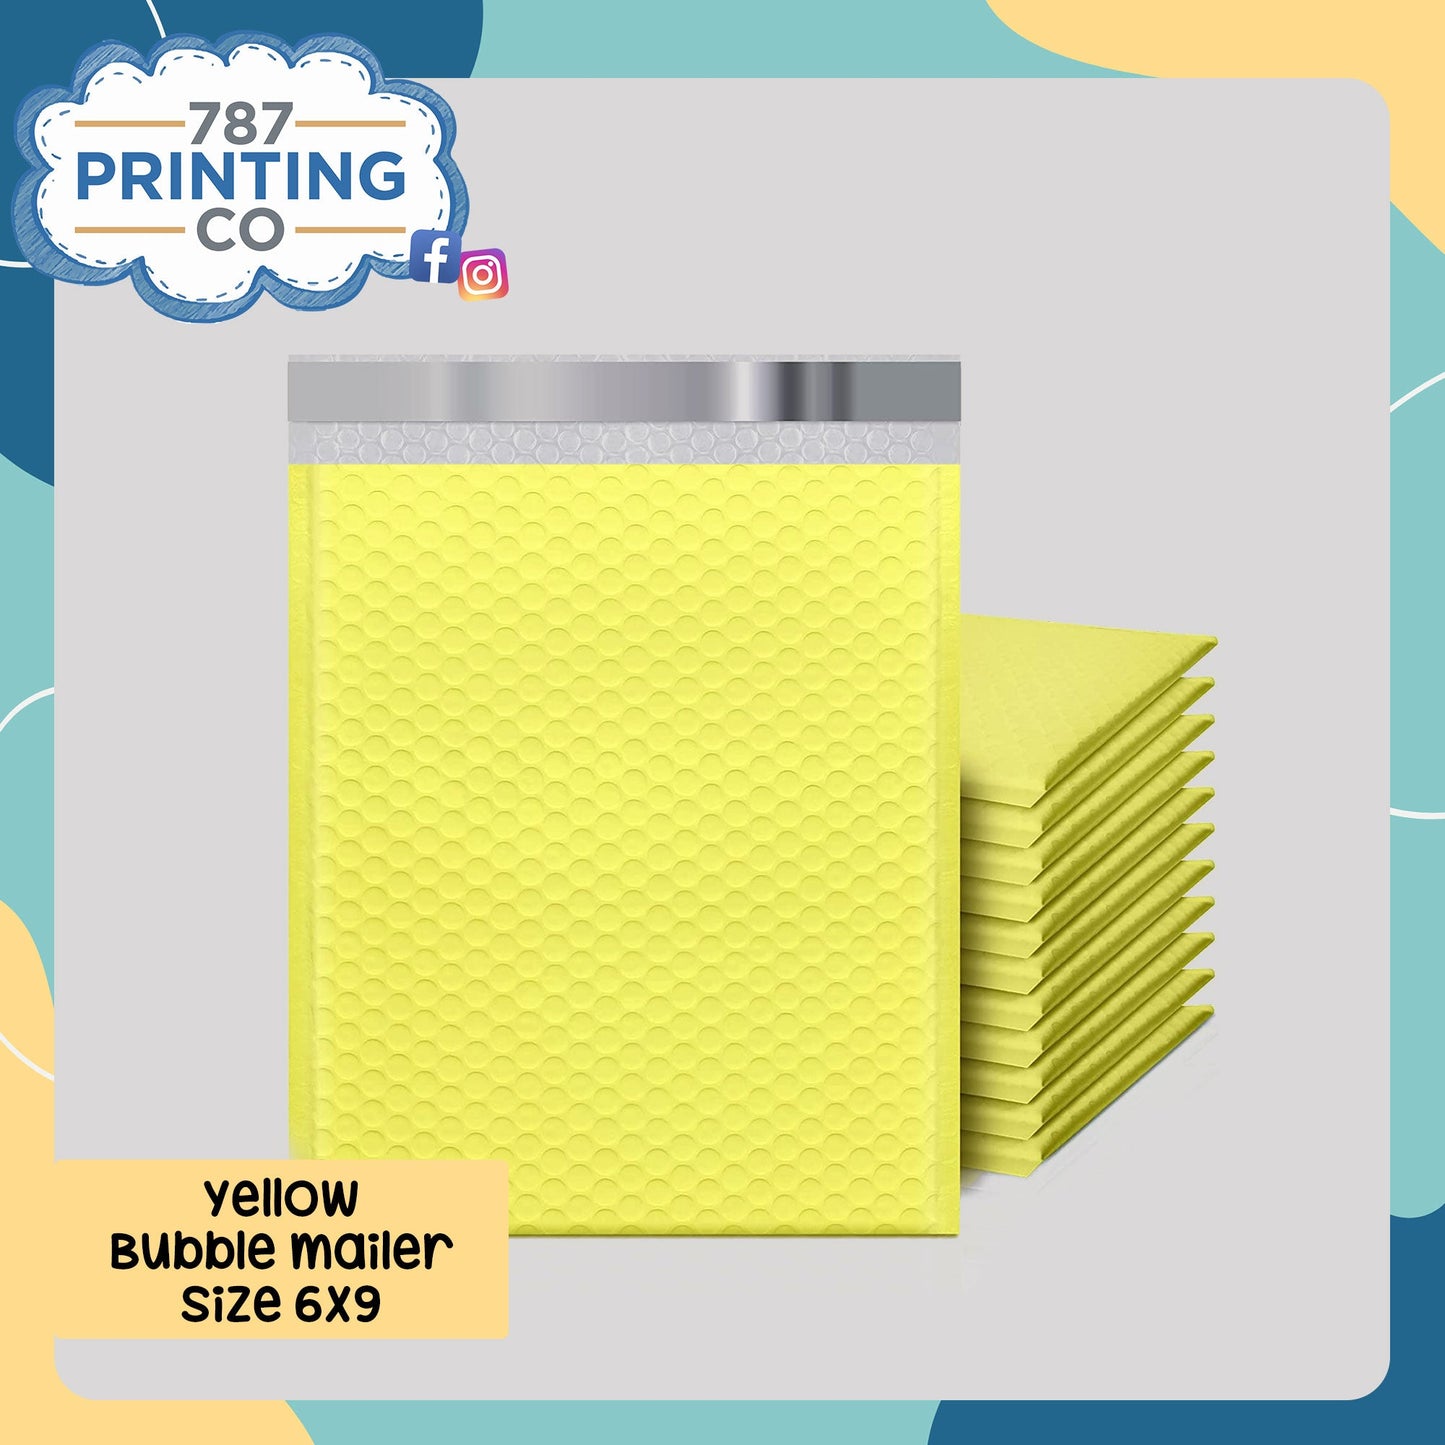 Yellow 6" x 9" Bubble Mailer - 787 Printing Co.